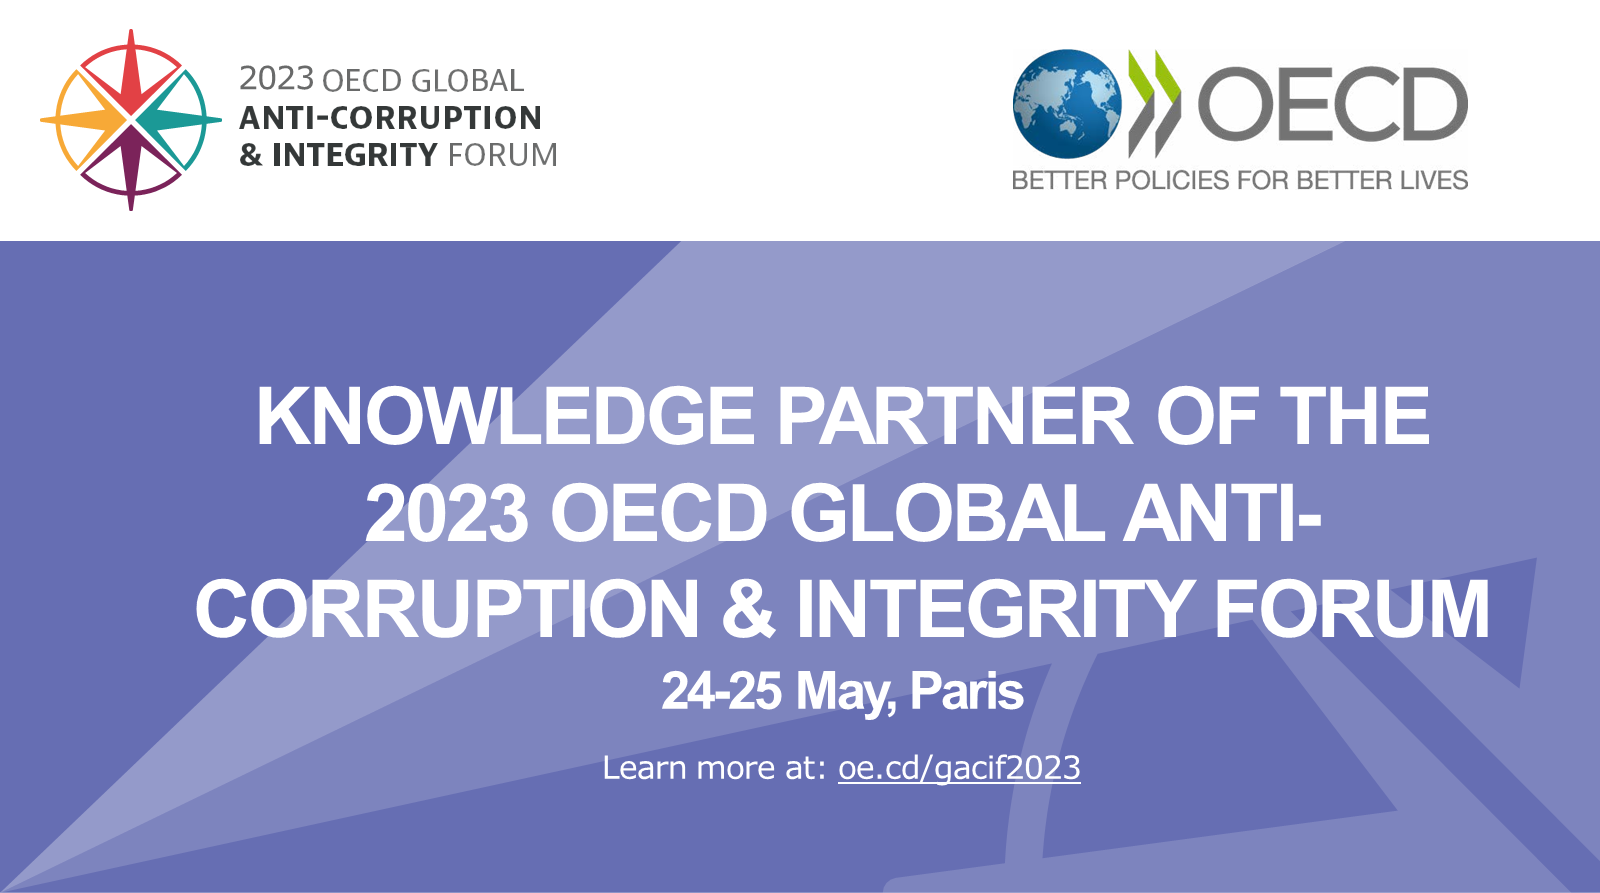 Knowledge Partner of the 2023 OECD Global Anti-Corruption and Integrity Forum